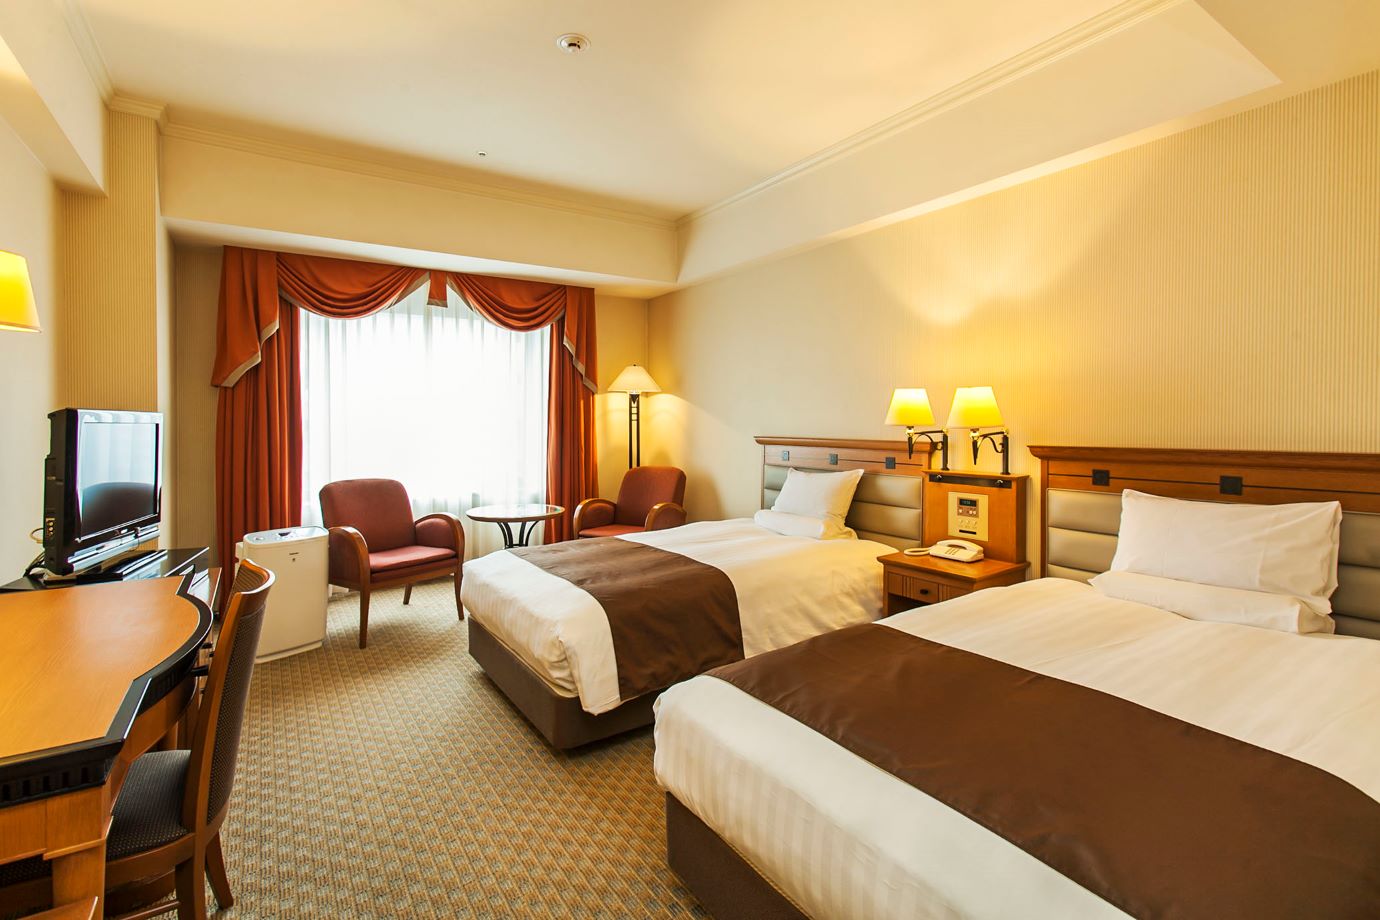 Enjoy your stay in comfort in a spacious room